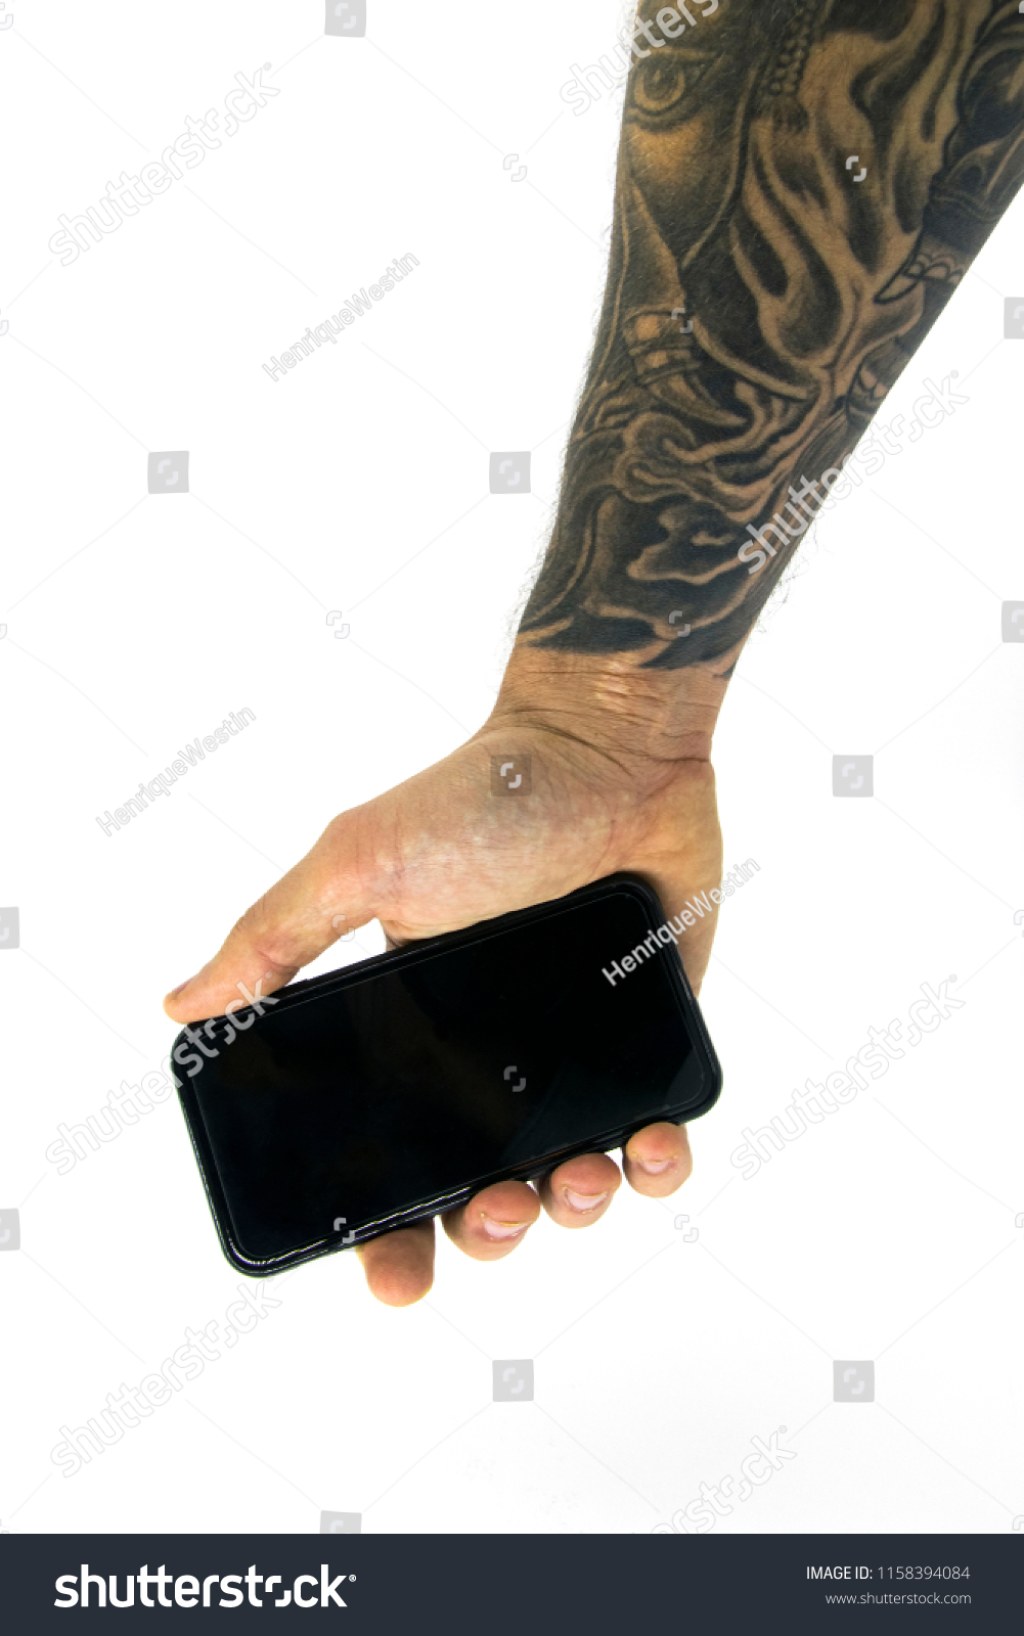 Picture of: Upside Down Hand Holding Smart Phone Stockfoto